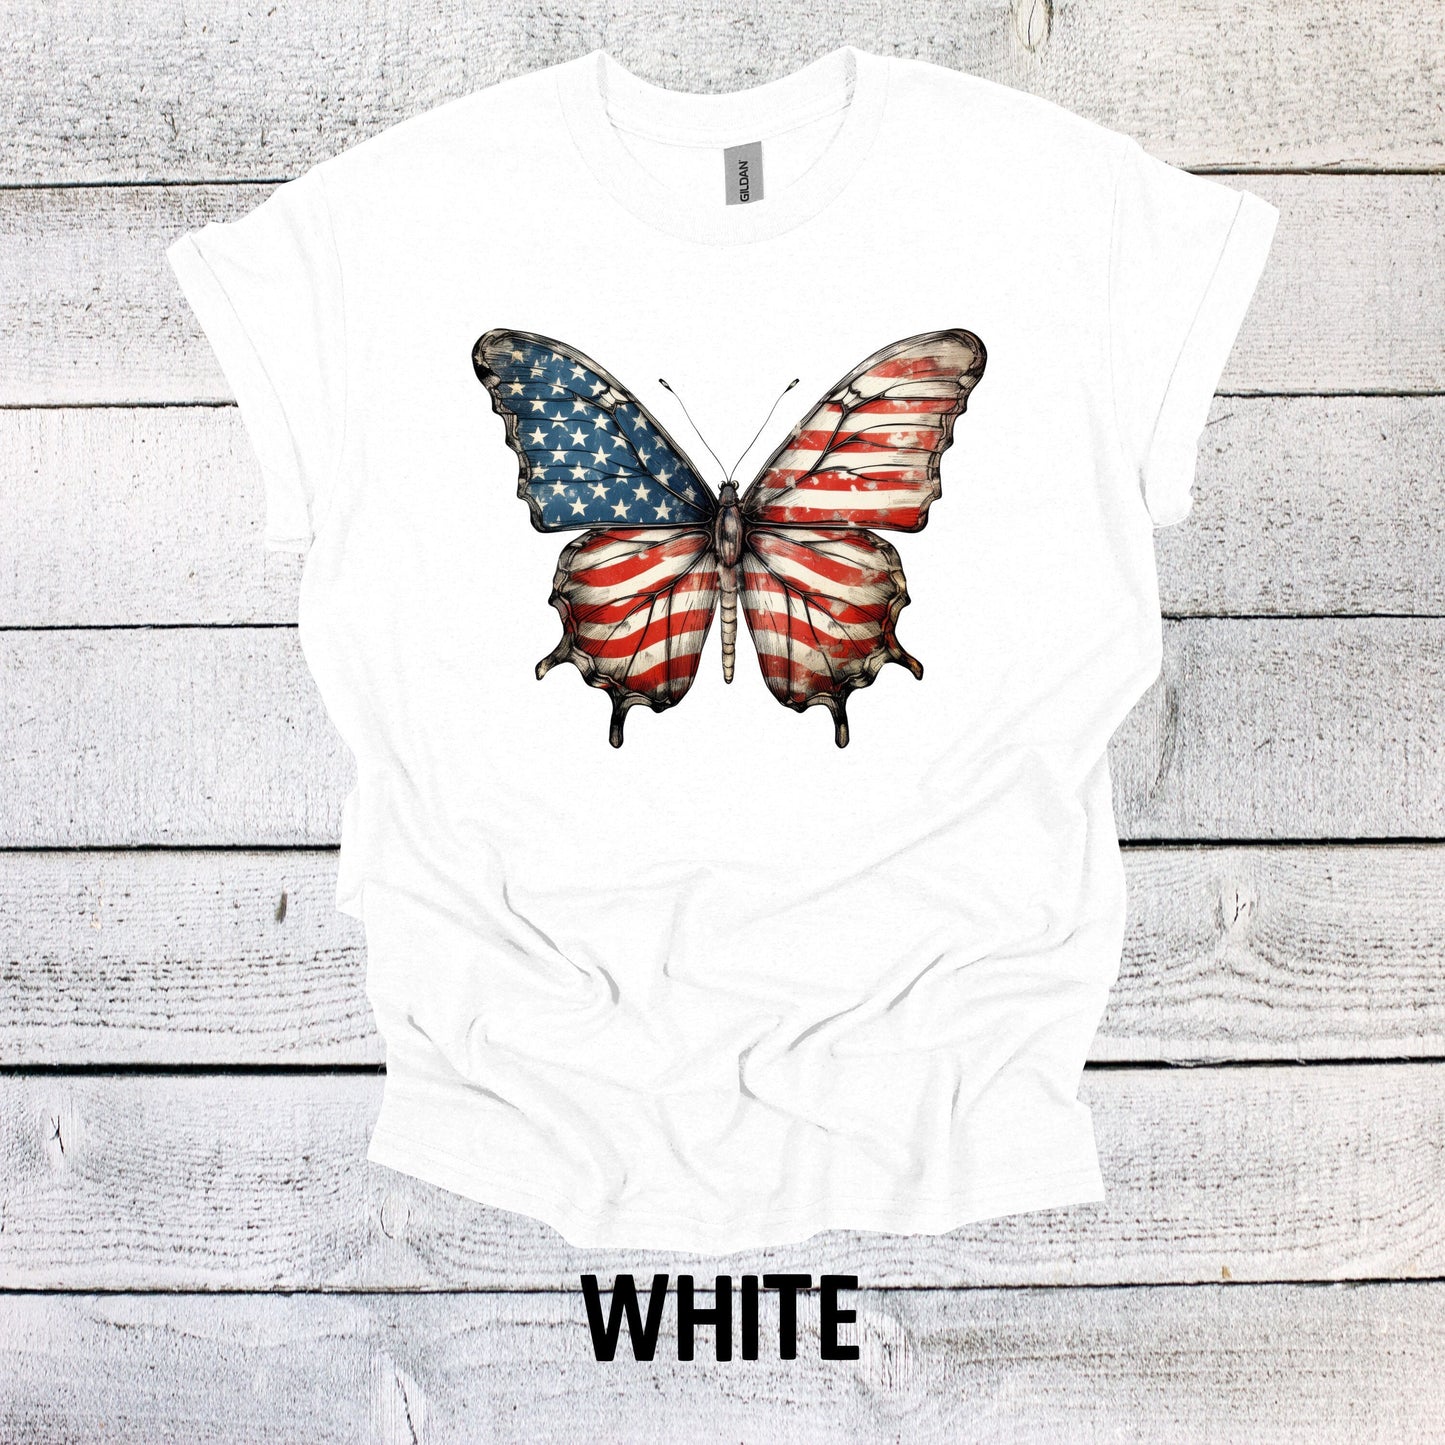 4th of July Shirt with Large Flag Butterfly Shirt- Festive Patriotic Top for Independence Day